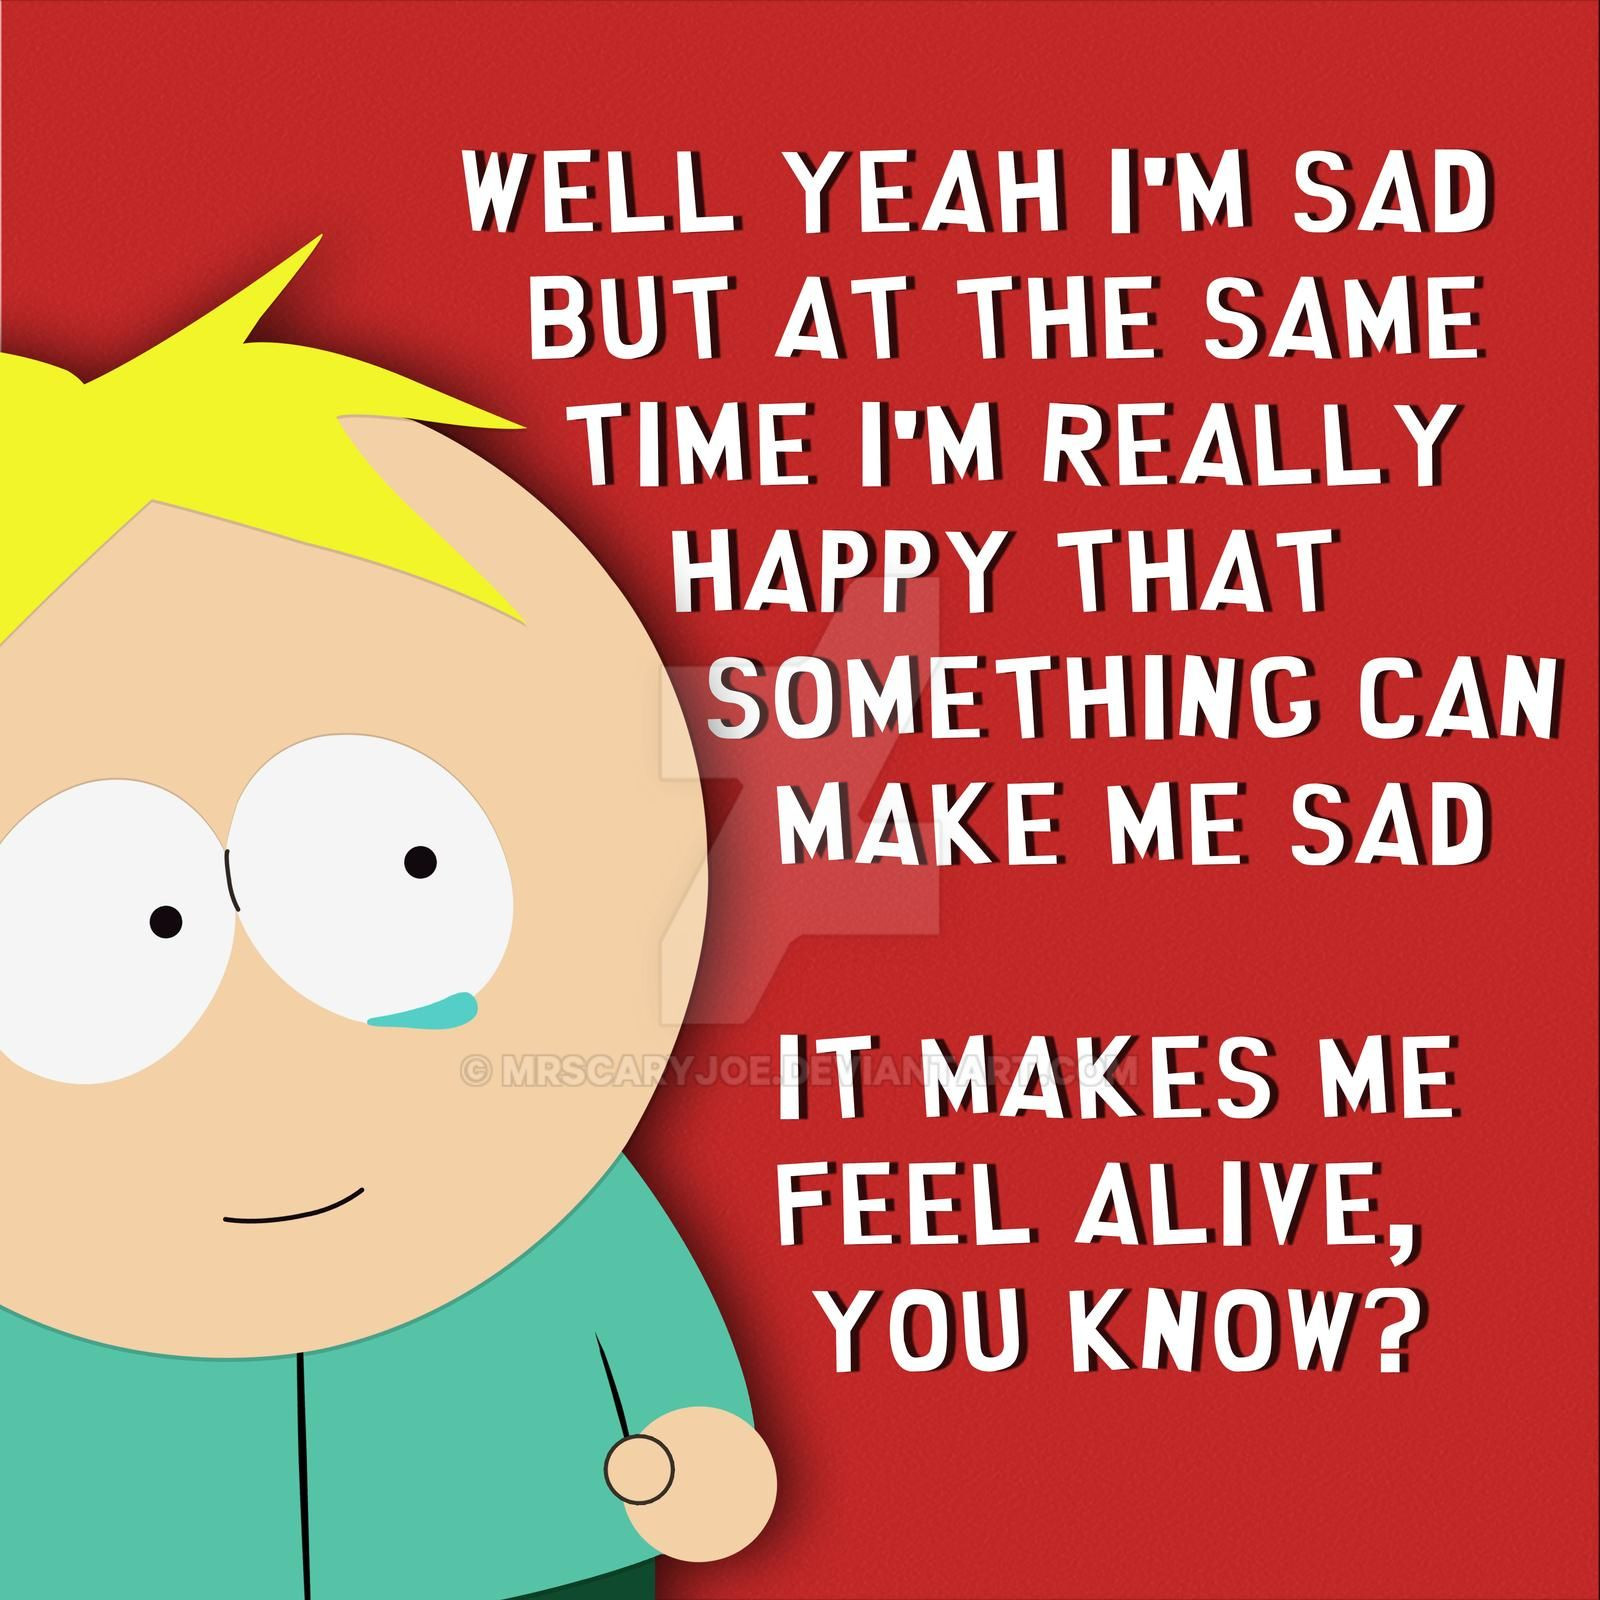 Butters Sad Quote
 South Park Butters Quote by MrScaryJoe on DeviantArt